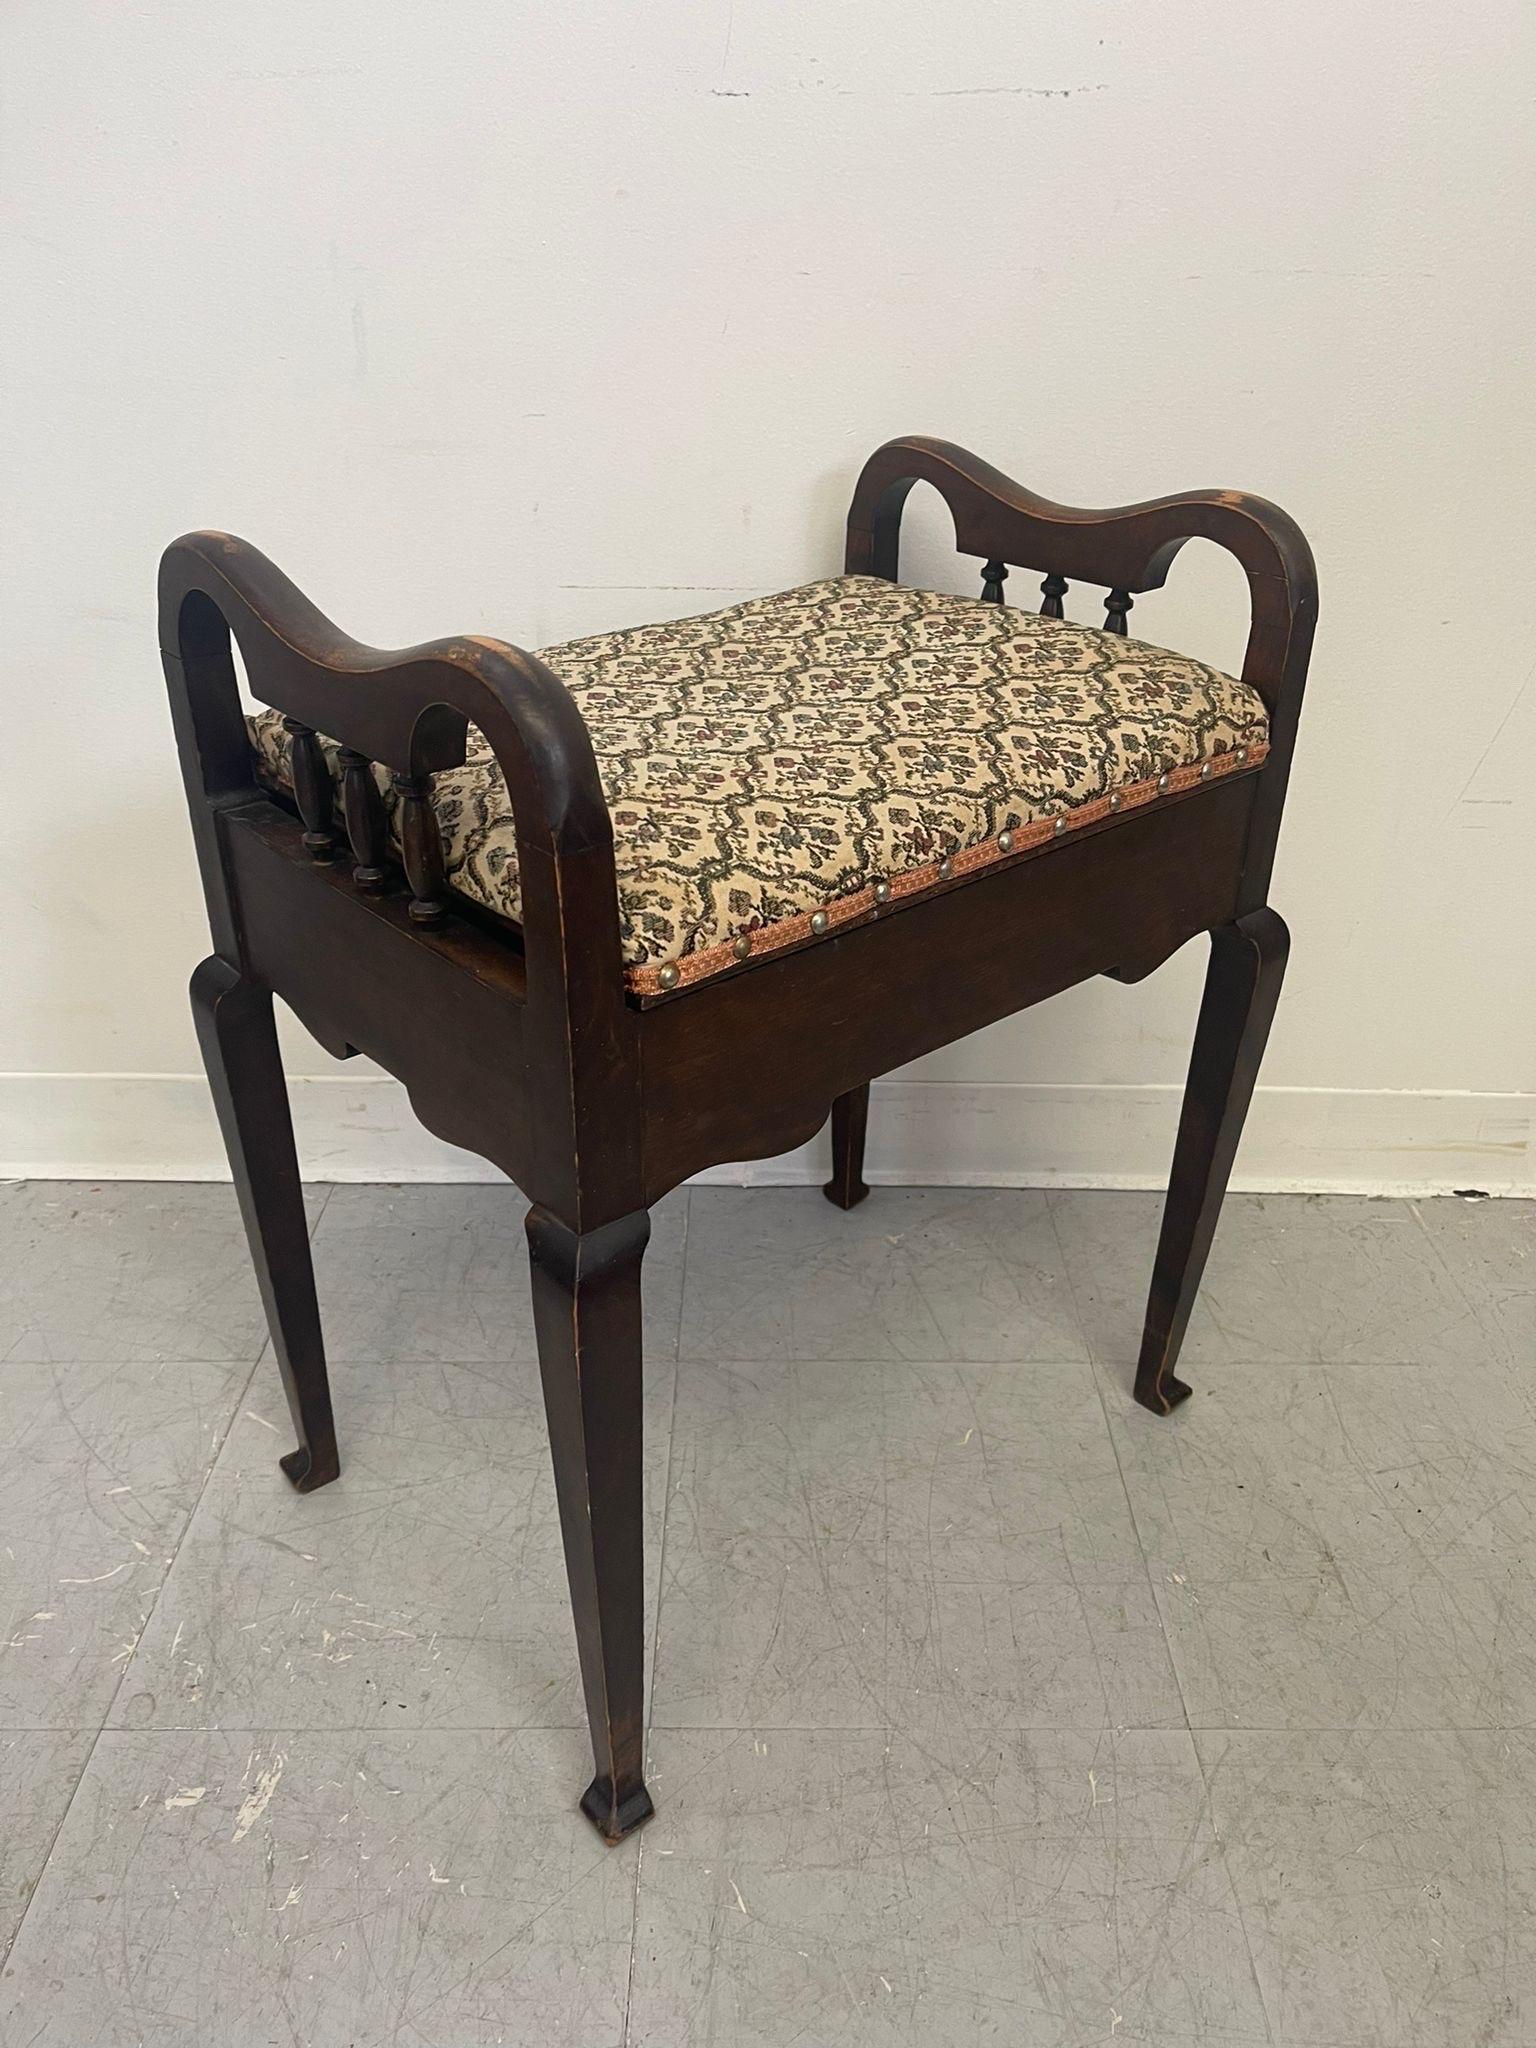 This Stool has beautiful carved detailing and Aging to the wood. The Upholstery has a stunning floral pattern. The seat lifts up to reveal a storage compartment. Vintage Condition Consistent with Age as Pictured.

Dimensions. 21 W ; 14 D ; 24 H